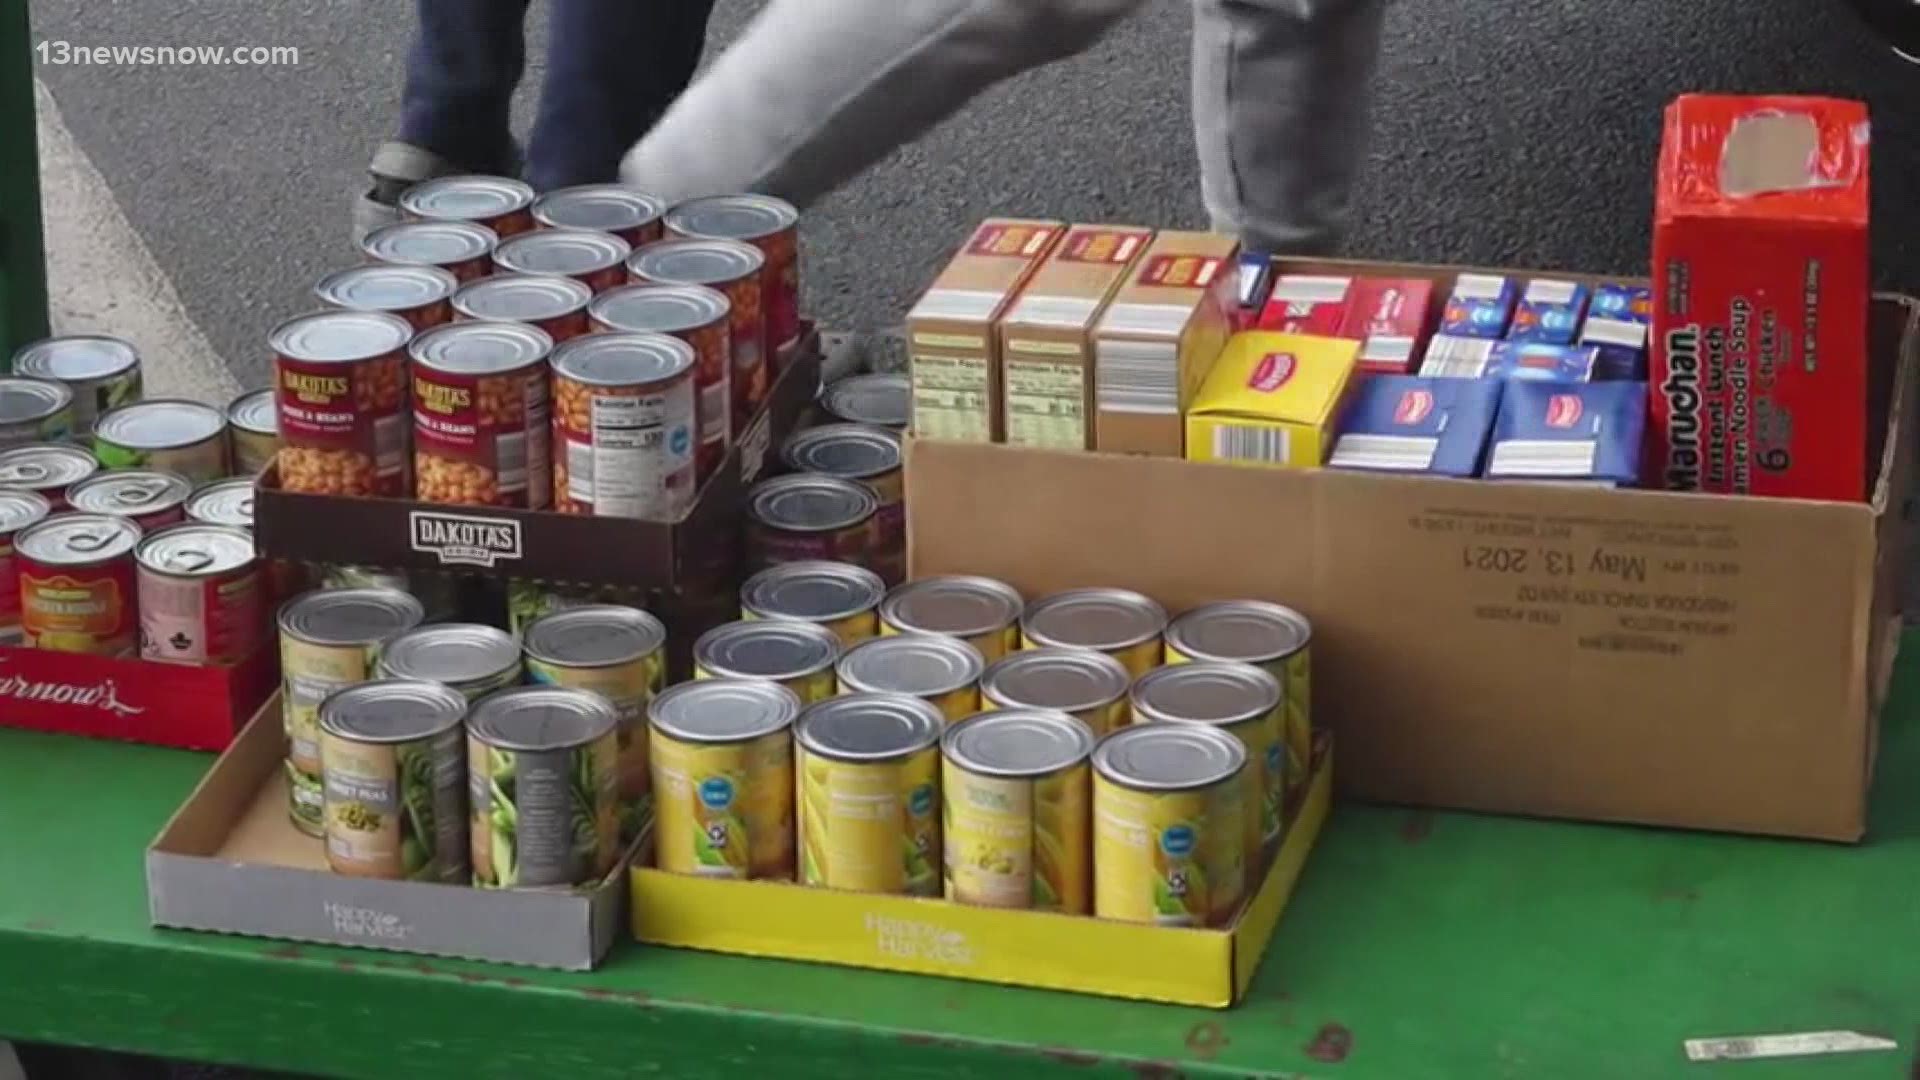 The Martin Luther King Jr. Day of Service Food Drive was held in Newport News to donate to the community.